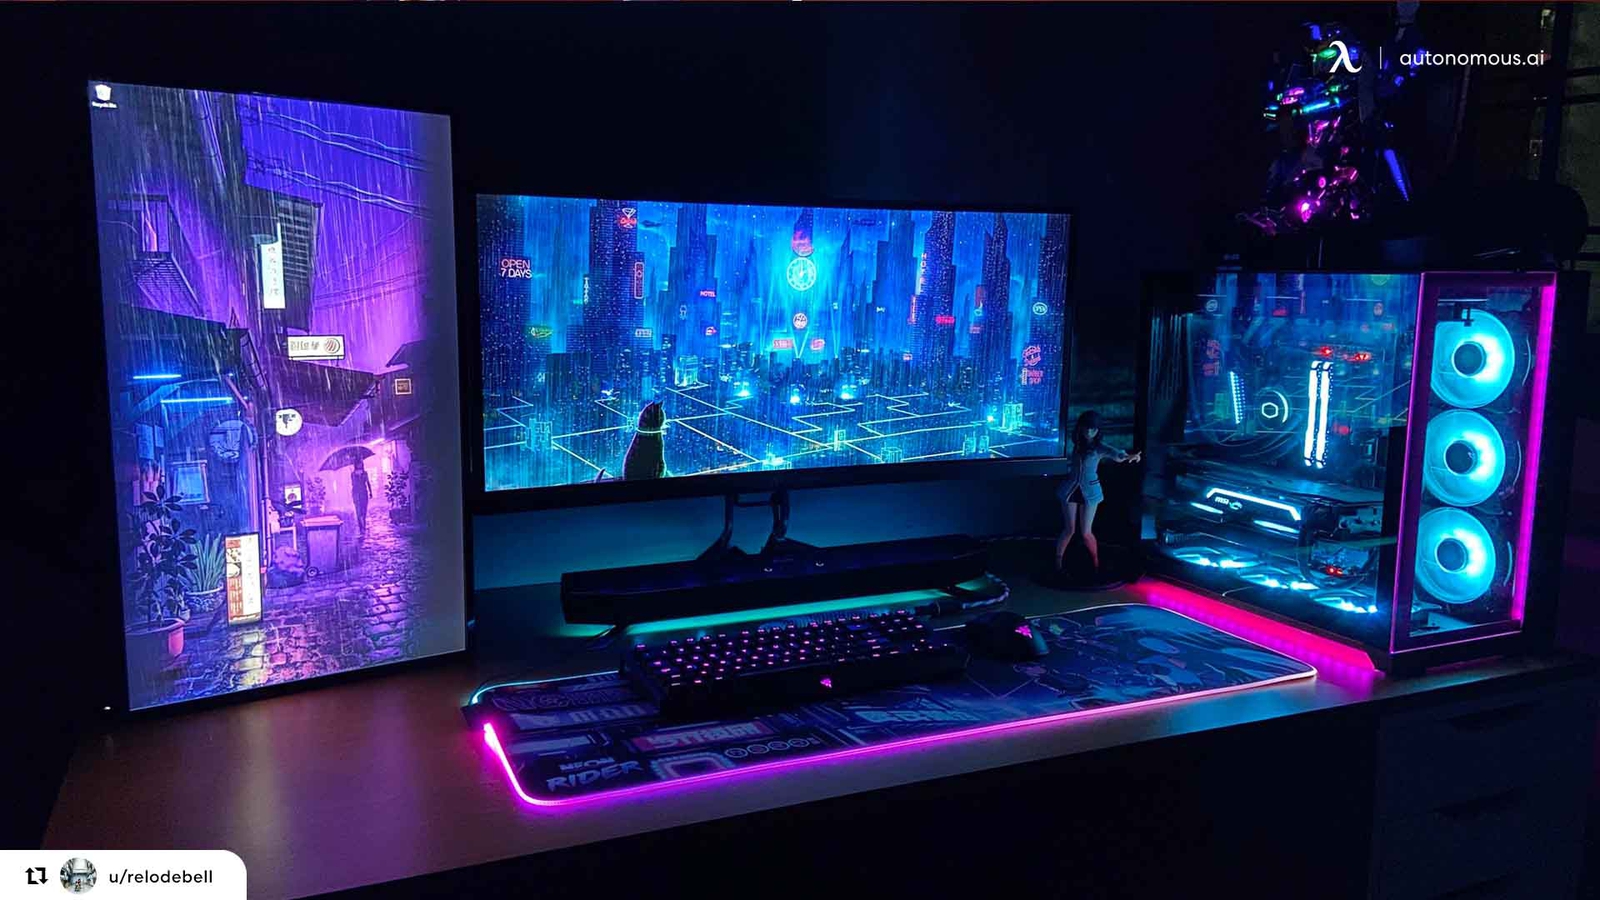 Awesome Gaming Computer Setup The Best Gaming Setups In 2021 / That's